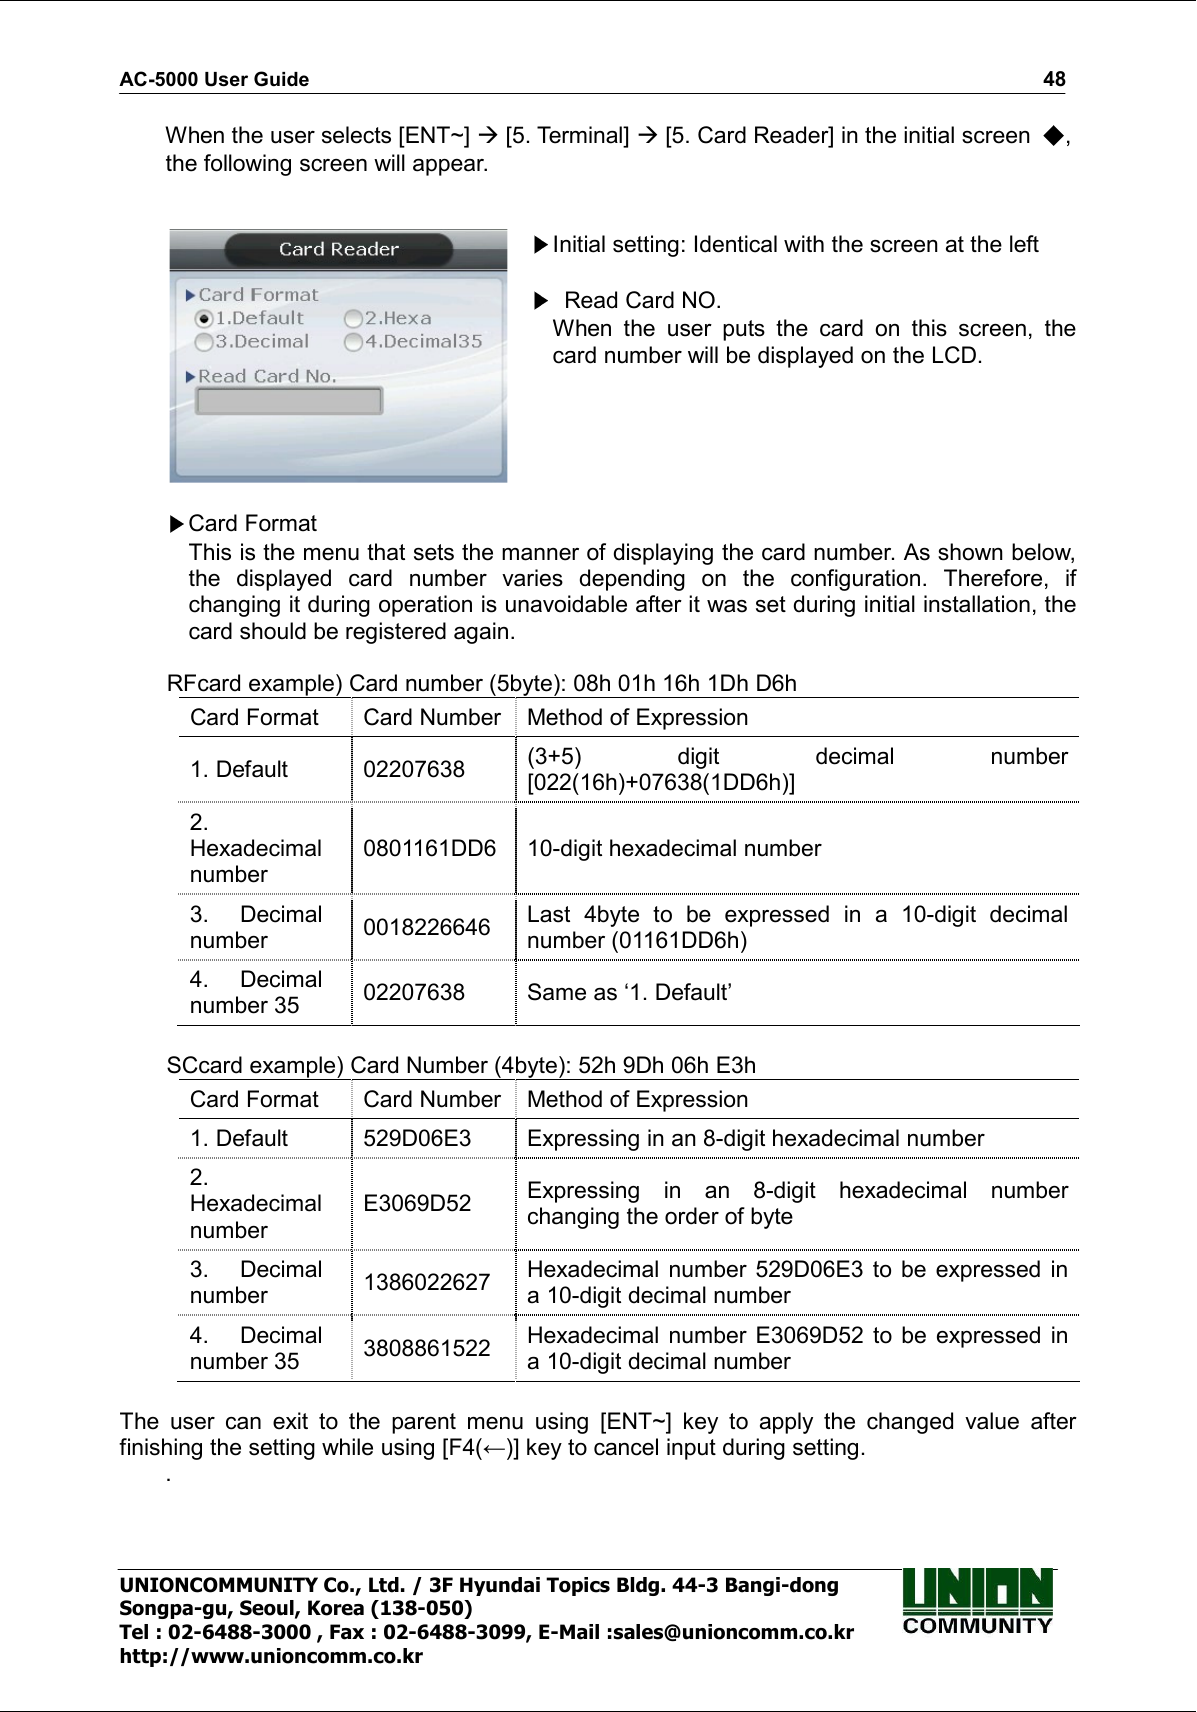 AC-5000 User Guide                                                                                                                                                   48 UNIONCOMMUNITY Co., Ltd. / 3F Hyundai Topics Bldg. 44-3 Bangi-dong Songpa-gu, Seoul, Korea (138-050) Tel : 02-6488-3000 , Fax : 02-6488-3099, E-Mail :sales@unioncomm.co.kr http://www.unioncomm.co.kr When the user selects [ENT~]  [5. Terminal]  [5. Card Reader] in the initial screen  , the following screen will appear.    Initial setting: Identical with the screen at the left    Read Card NO. When  the  user  puts  the  card  on  this  screen,  the card number will be displayed on the LCD.   Card Format             This is the menu that sets the manner of displaying the card number. As shown below, the  displayed  card  number  varies  depending  on  the  configuration.  Therefore,  if changing it during operation is unavoidable after it was set during initial installation, the card should be registered again.  RFcard example) Card number (5byte): 08h 01h 16h 1Dh D6h Card Format  Card Number Method of Expression 1. Default  02207638  (3+5)  digit  decimal  number [022(16h)+07638(1DD6h)] 2. Hexadecimal number 0801161DD6  10-digit hexadecimal number 3.  Decimal number  0018226646  Last  4byte  to  be  expressed  in  a  10-digit  decimal number (01161DD6h) 4.  Decimal number 35  02207638  Same as ‘1. Default’  SCcard example) Card Number (4byte): 52h 9Dh 06h E3h Card Format  Card Number Method of Expression 1. Default  529D06E3  Expressing in an 8-digit hexadecimal number 2. Hexadecimal number E3069D52  Expressing  in  an  8-digit  hexadecimal  number changing the order of byte 3.  Decimal number  1386022627  Hexadecimal number 529D06E3  to  be  expressed  in a 10-digit decimal number 4.  Decimal number 35  3808861522  Hexadecimal  number  E3069D52  to  be  expressed  in a 10-digit decimal number    The  user  can  exit  to  the  parent  menu  using  [ENT~]  key  to  apply  the  changed  value  after finishing the setting while using [F4(←)] key to cancel input during setting. .  